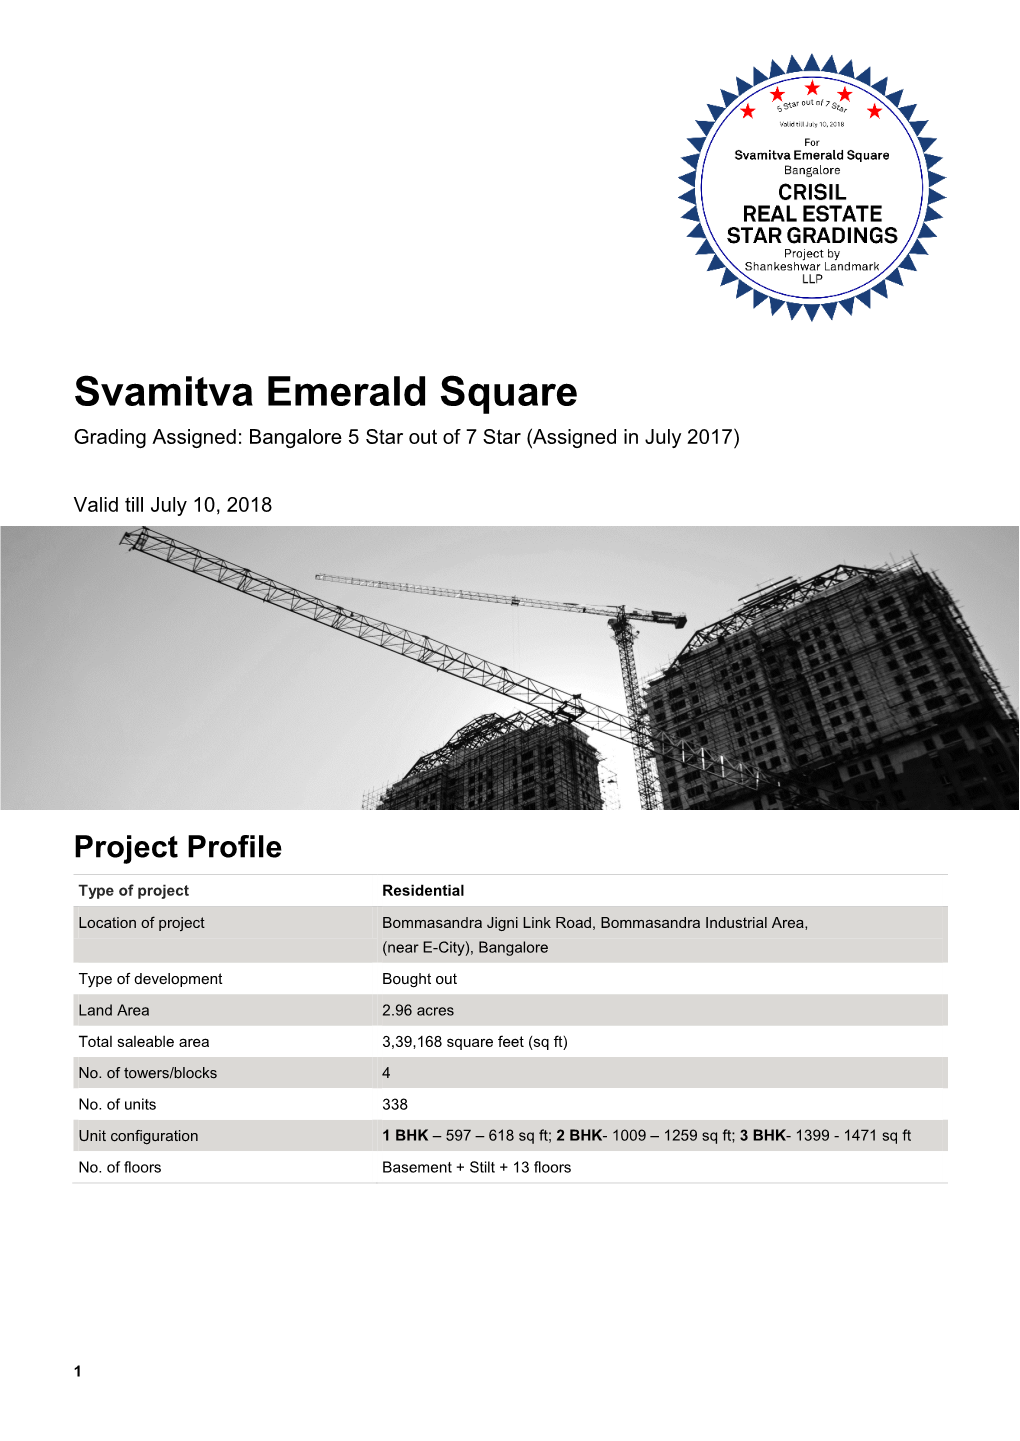 Svamitva Emerald Square Grading Assigned: Bangalore 5 Star out of 7 Star (Assigned in July 2017)